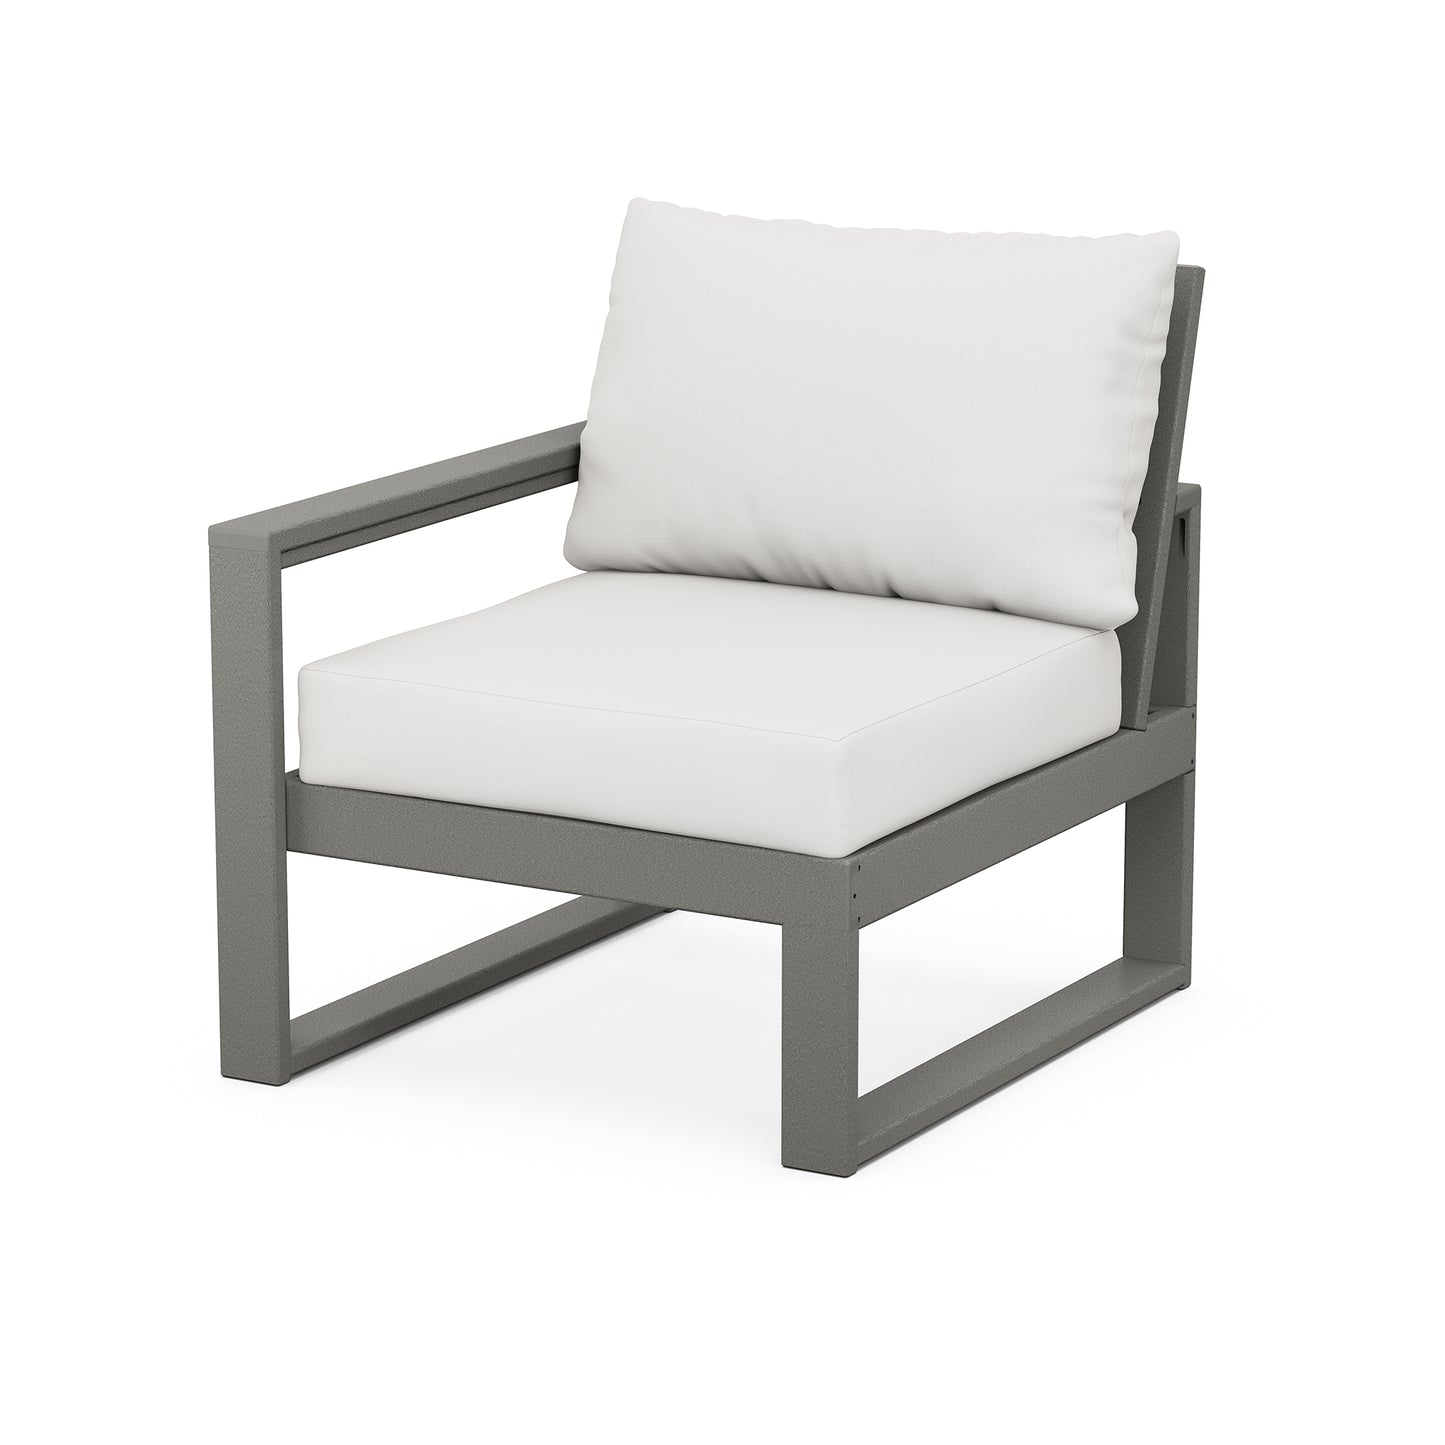 A modern outdoor armchair featuring a POLYWOOD EDGE Modular Left Arm Chair with a gray metal frame and white cushions on both the seat and back, set against a plain white background, designed with weather-resistant construction.